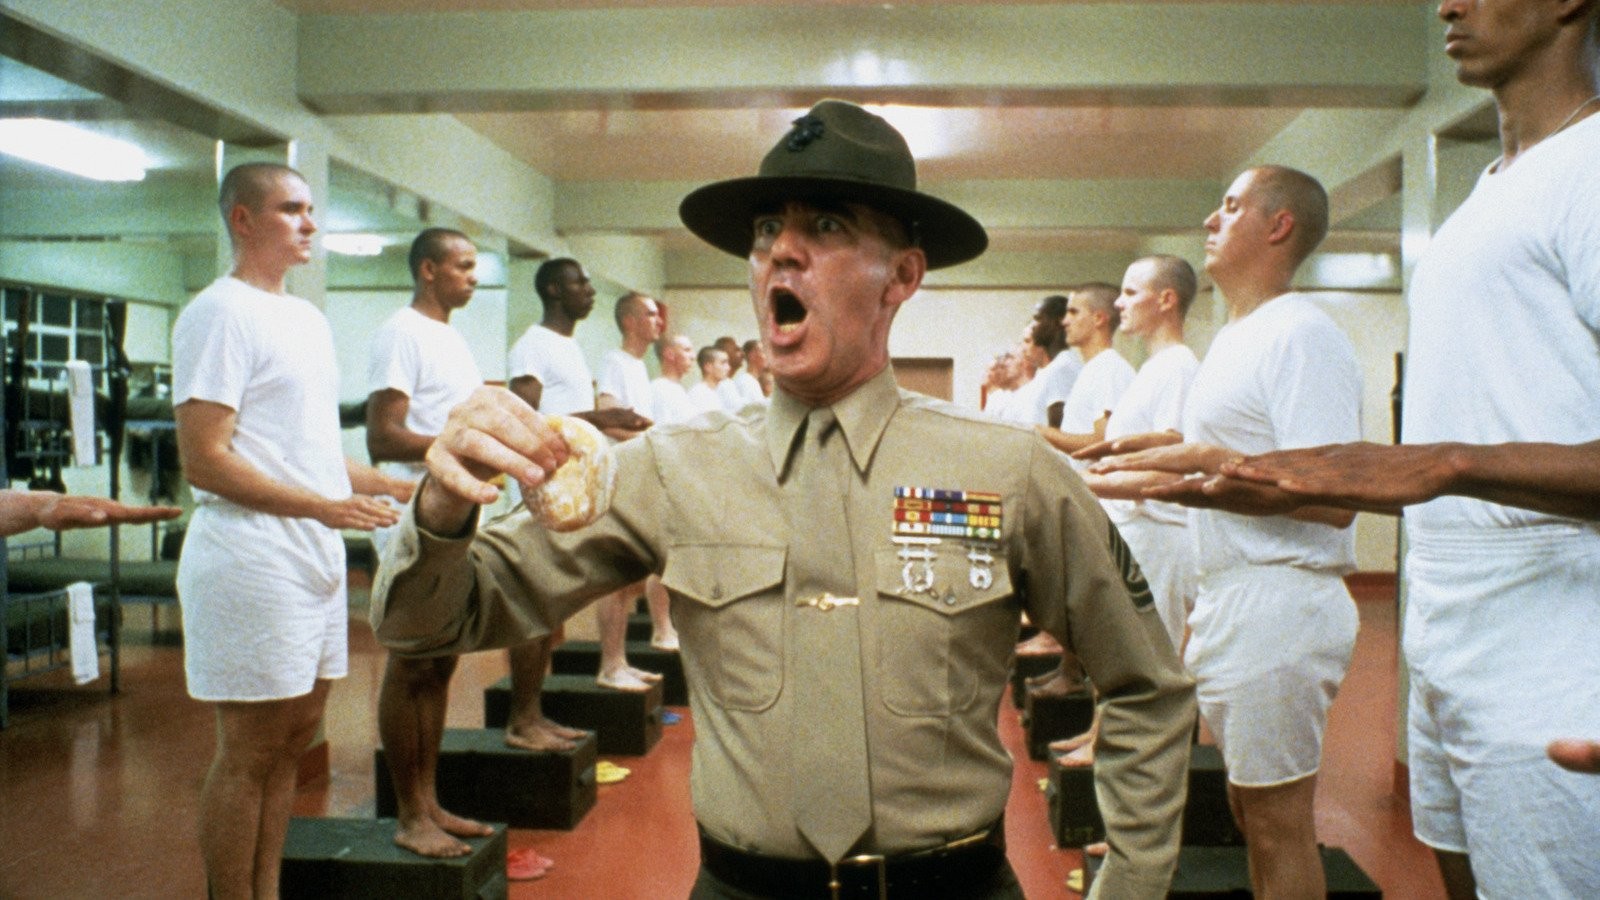 Full Metal Jacket Cast: The Faces Behind The Stanley Kubrick Classic